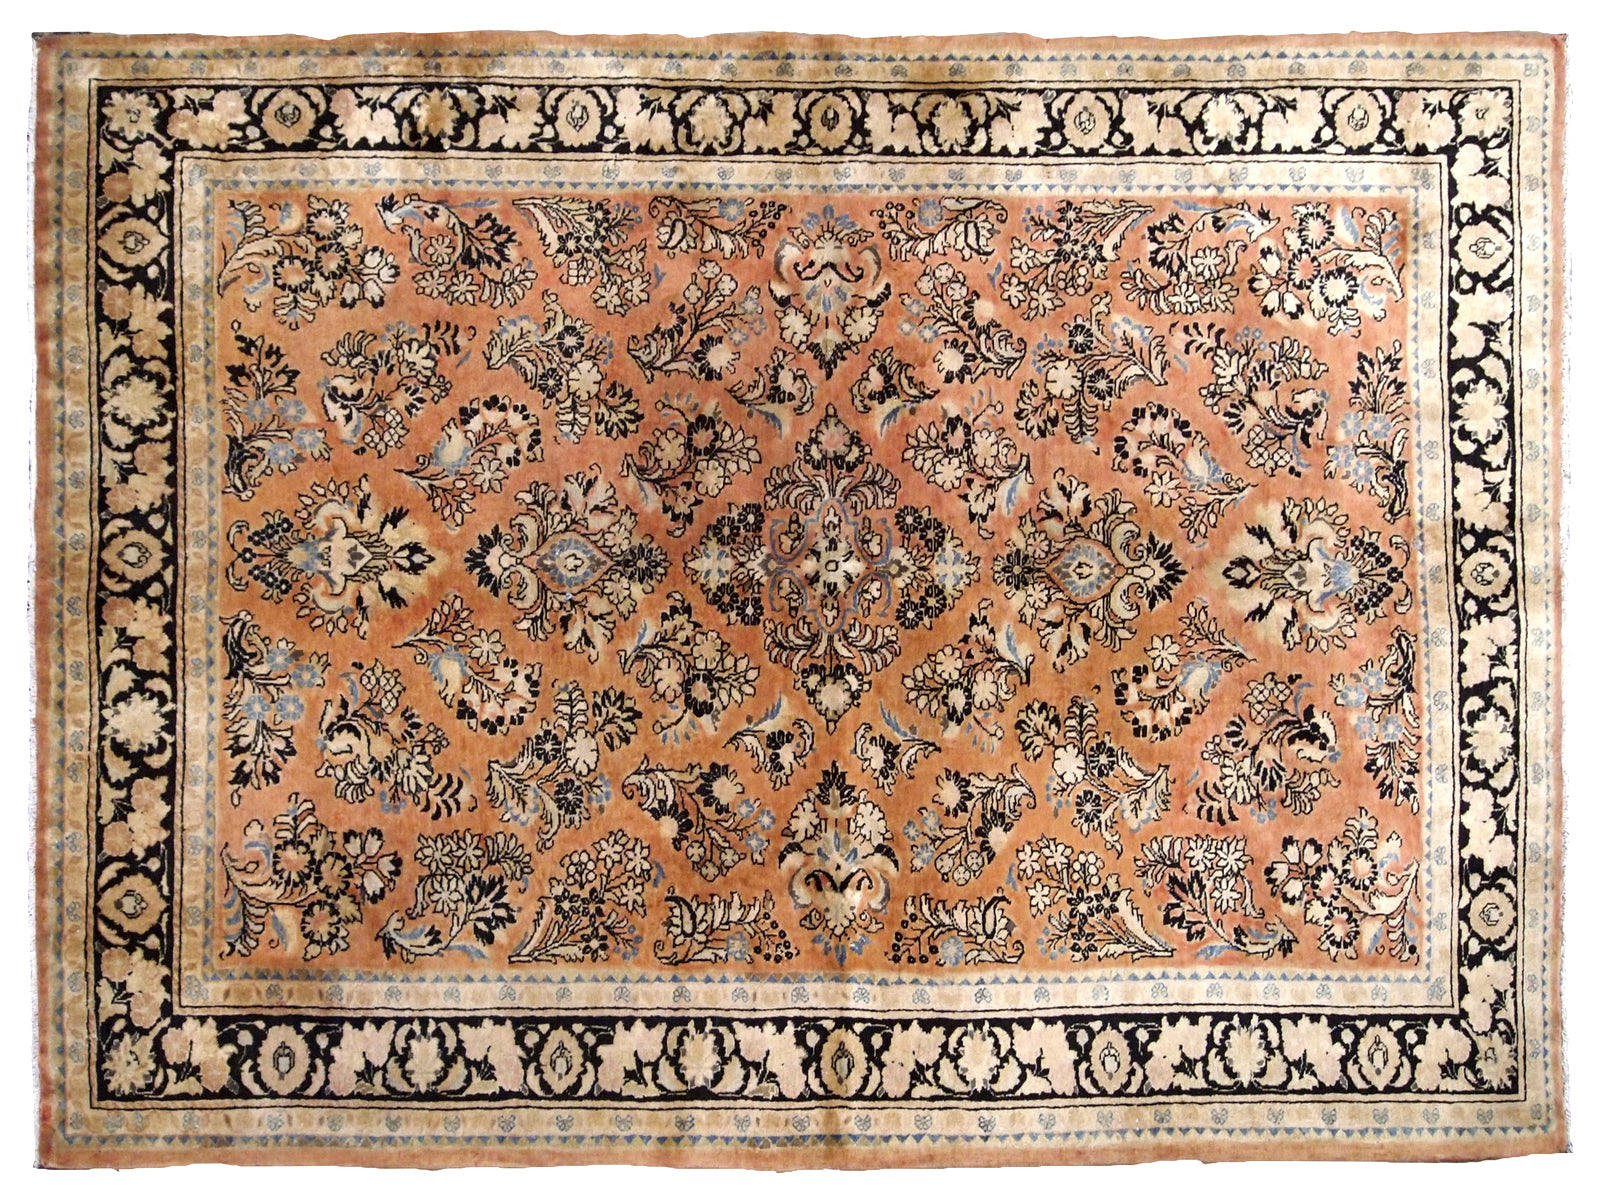 Antique hand made Persian Sarouk rug in salmon shade. The rug is from the beginning of 20th century in original good condition.